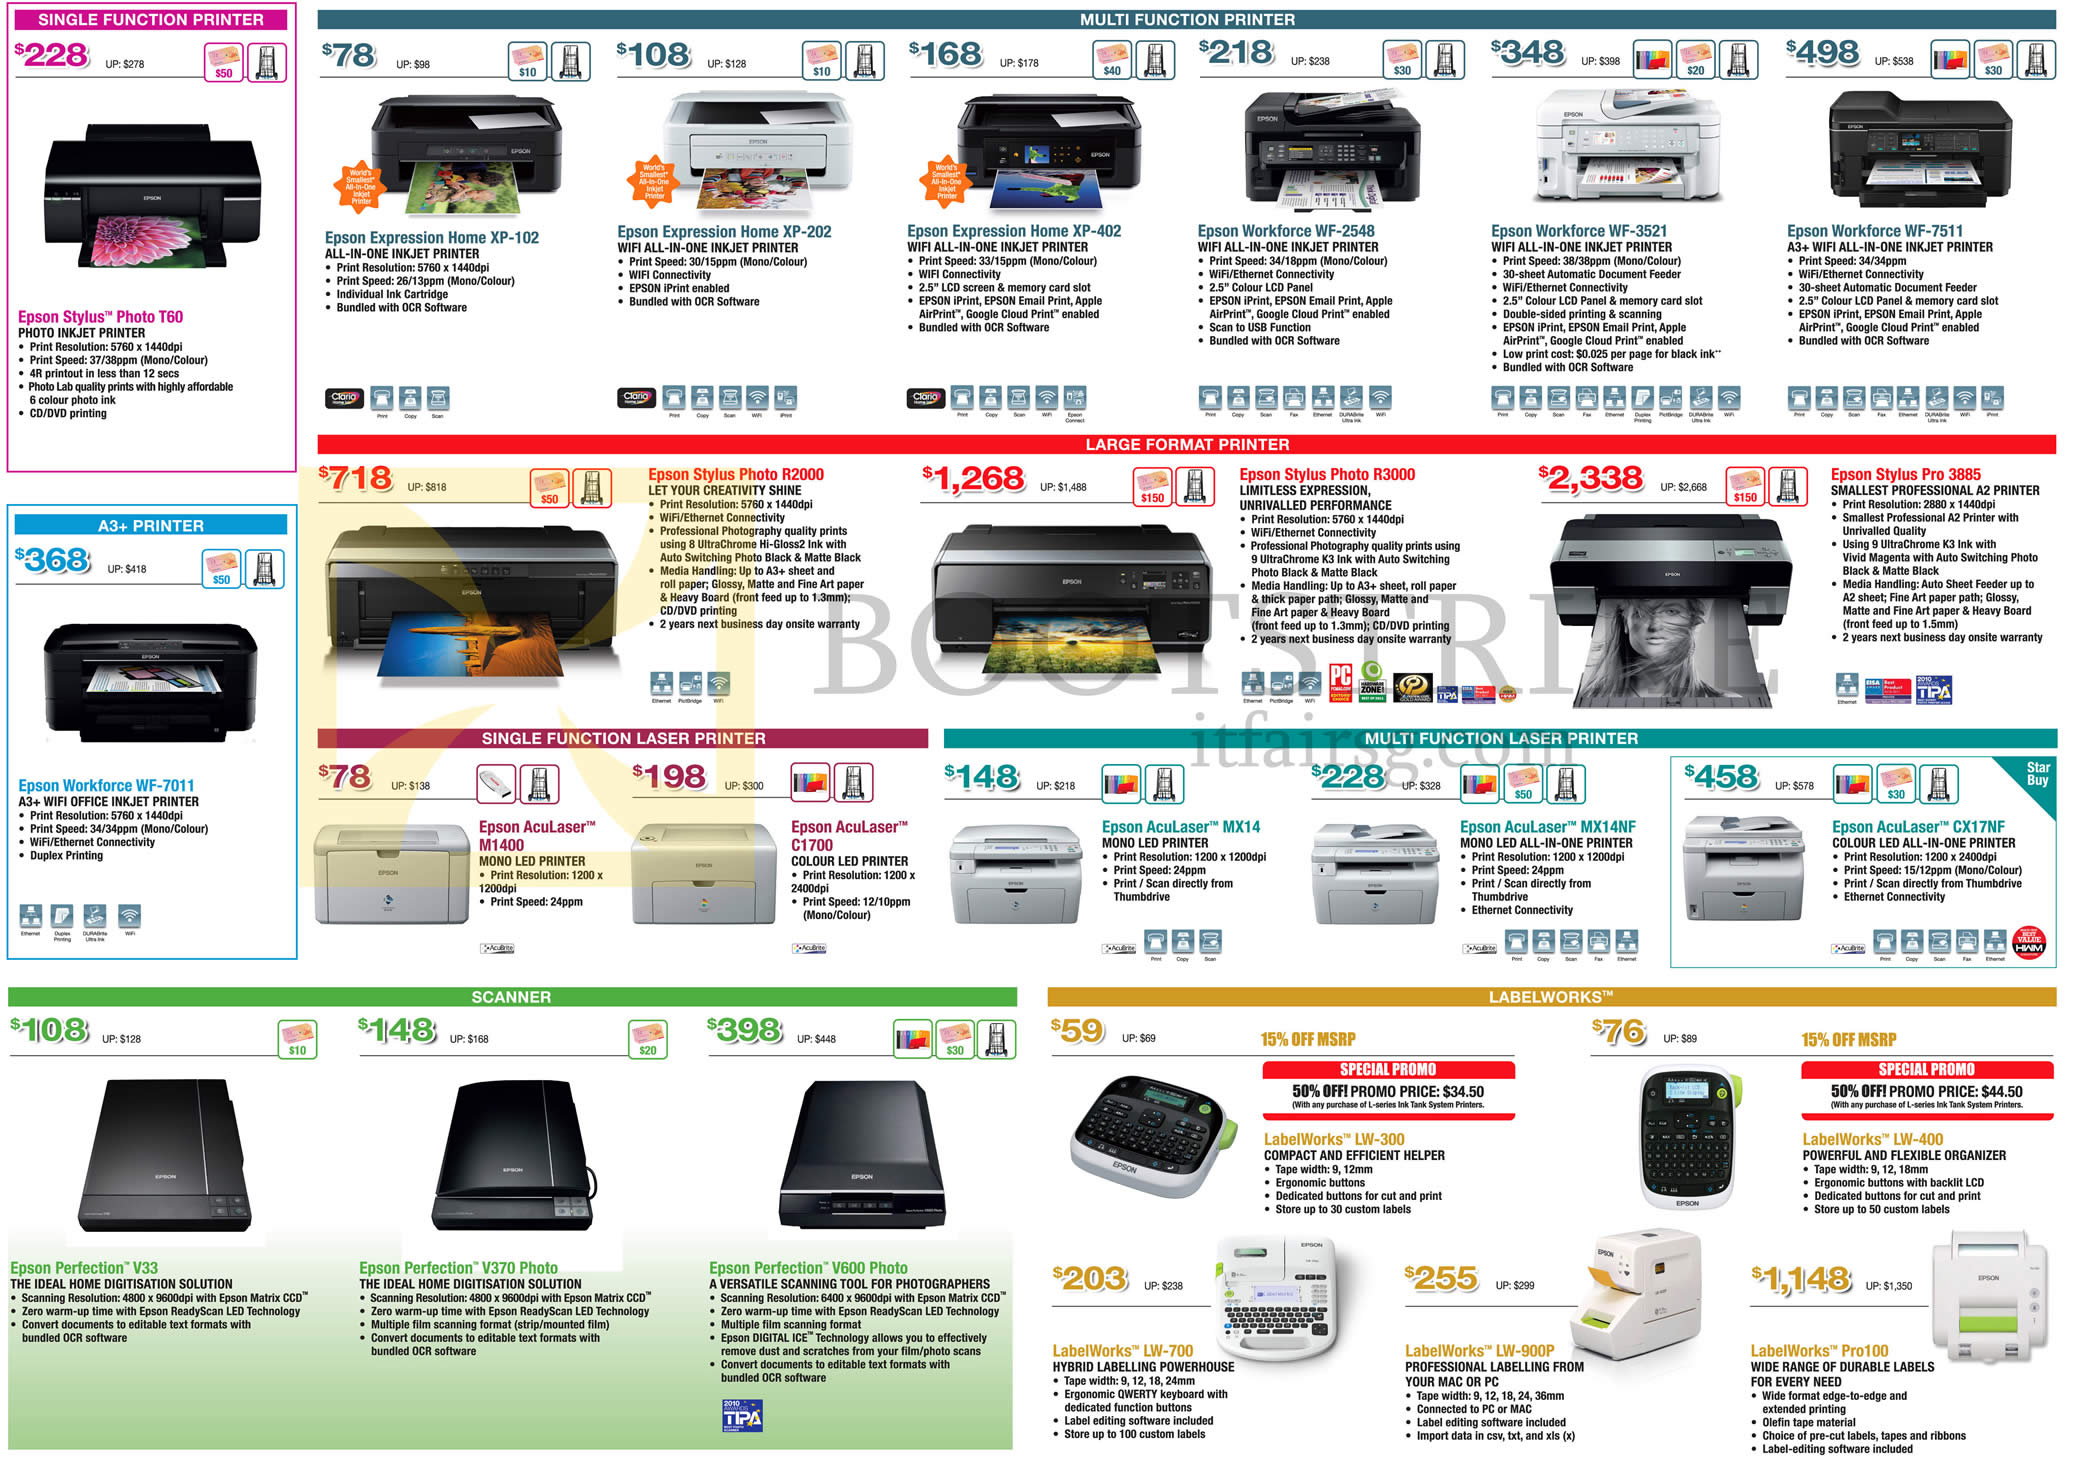 COMEX 2013 price list image brochure of Epson Printers Stylus Photo T60, XP-102 402, WF-2548 3521 7511 7011, R2000 R3000, Stylus Pro 3805, AcuLaser M1400 C1700 MX14 MX14NF CX17NF, Perfection Scanners